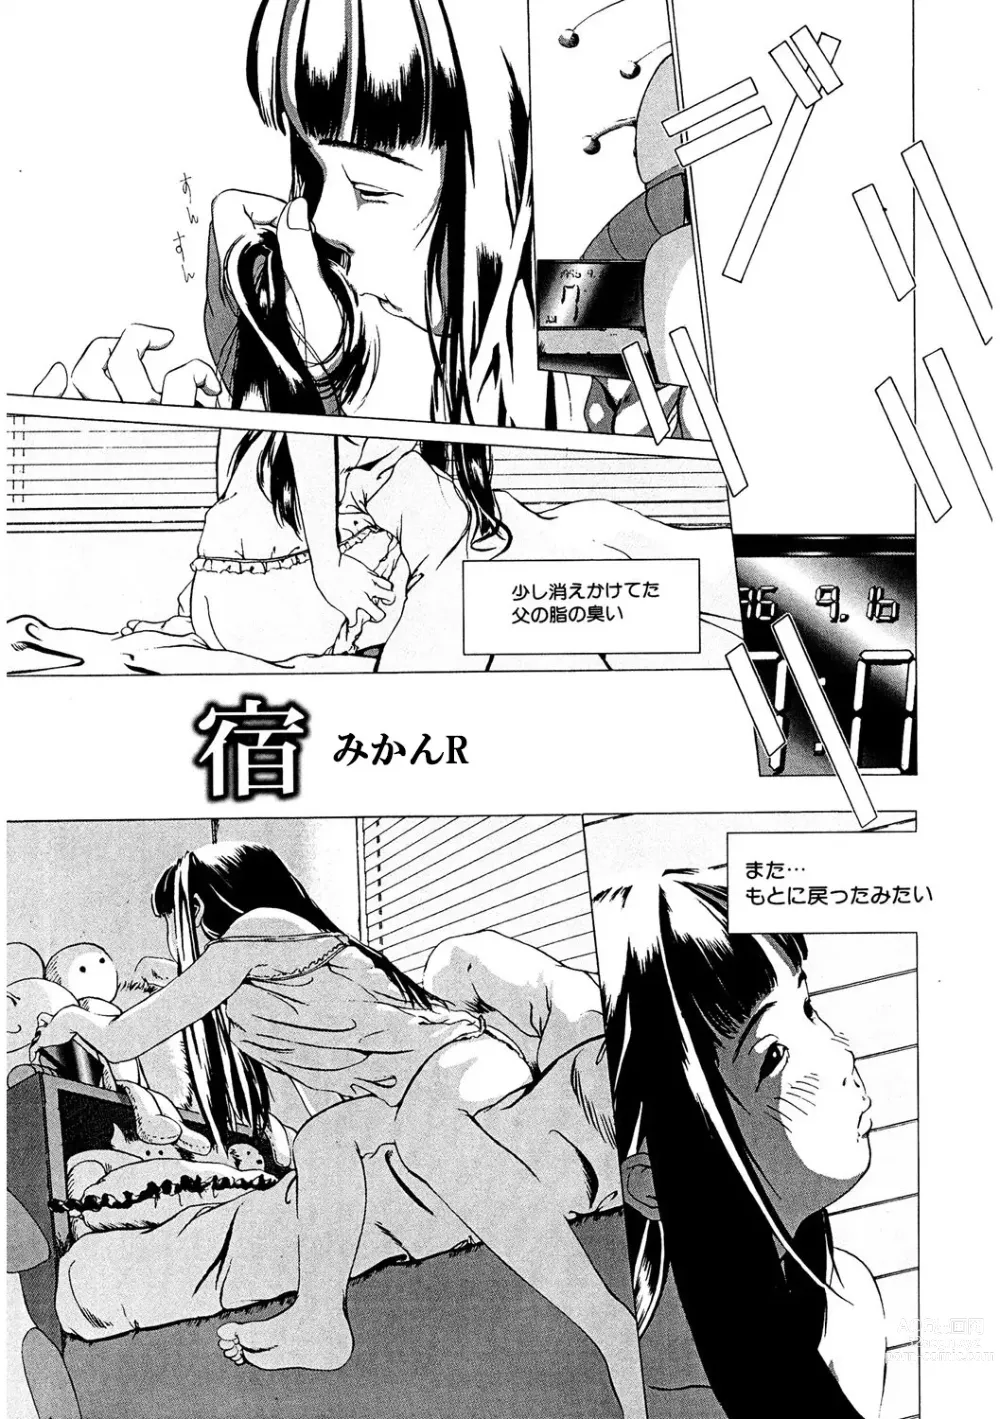 Page 158 of manga LQ -Little Queen- Vol. 53